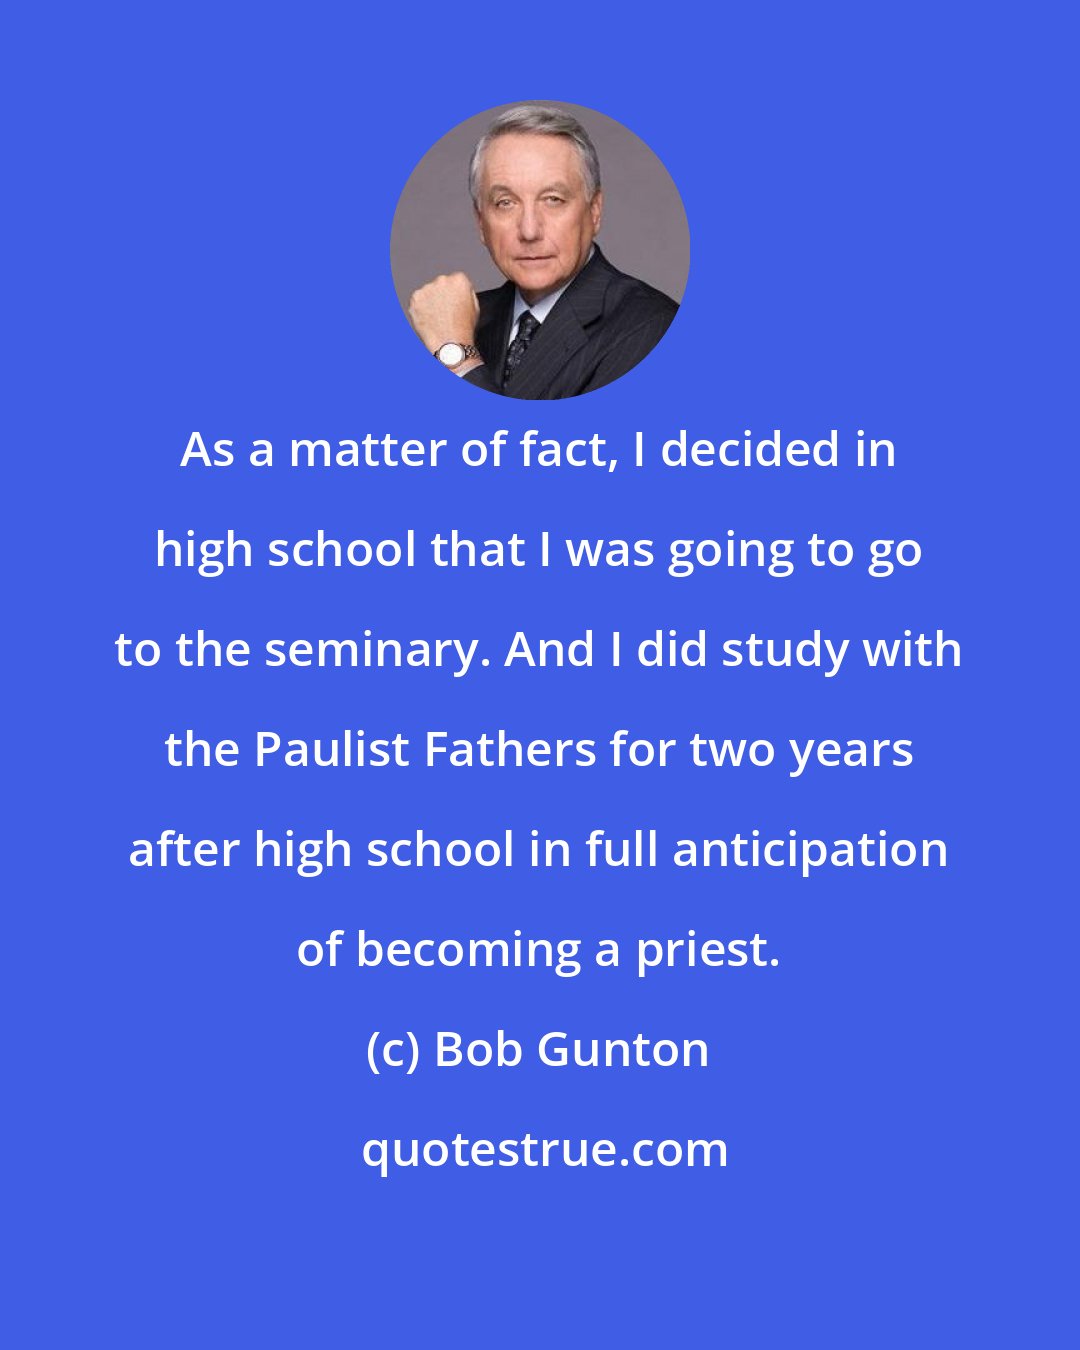 Bob Gunton: As a matter of fact, I decided in high school that I was going to go to the seminary. And I did study with the Paulist Fathers for two years after high school in full anticipation of becoming a priest.